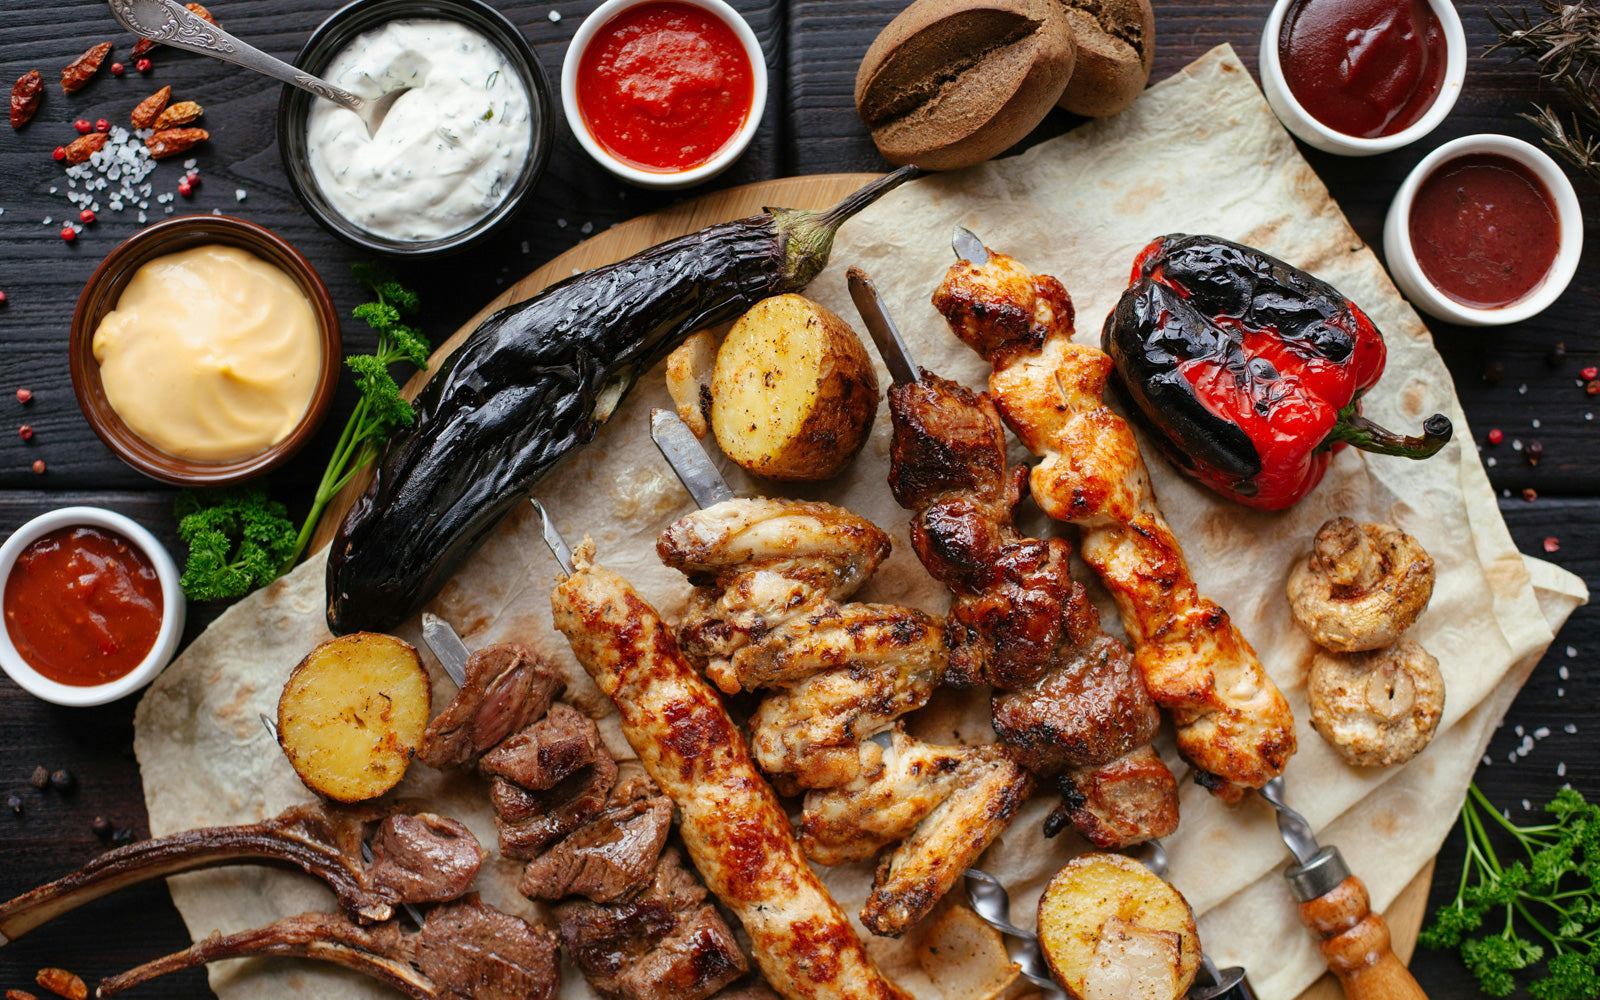 Assorted grilled veggies & meats with sauces & spices